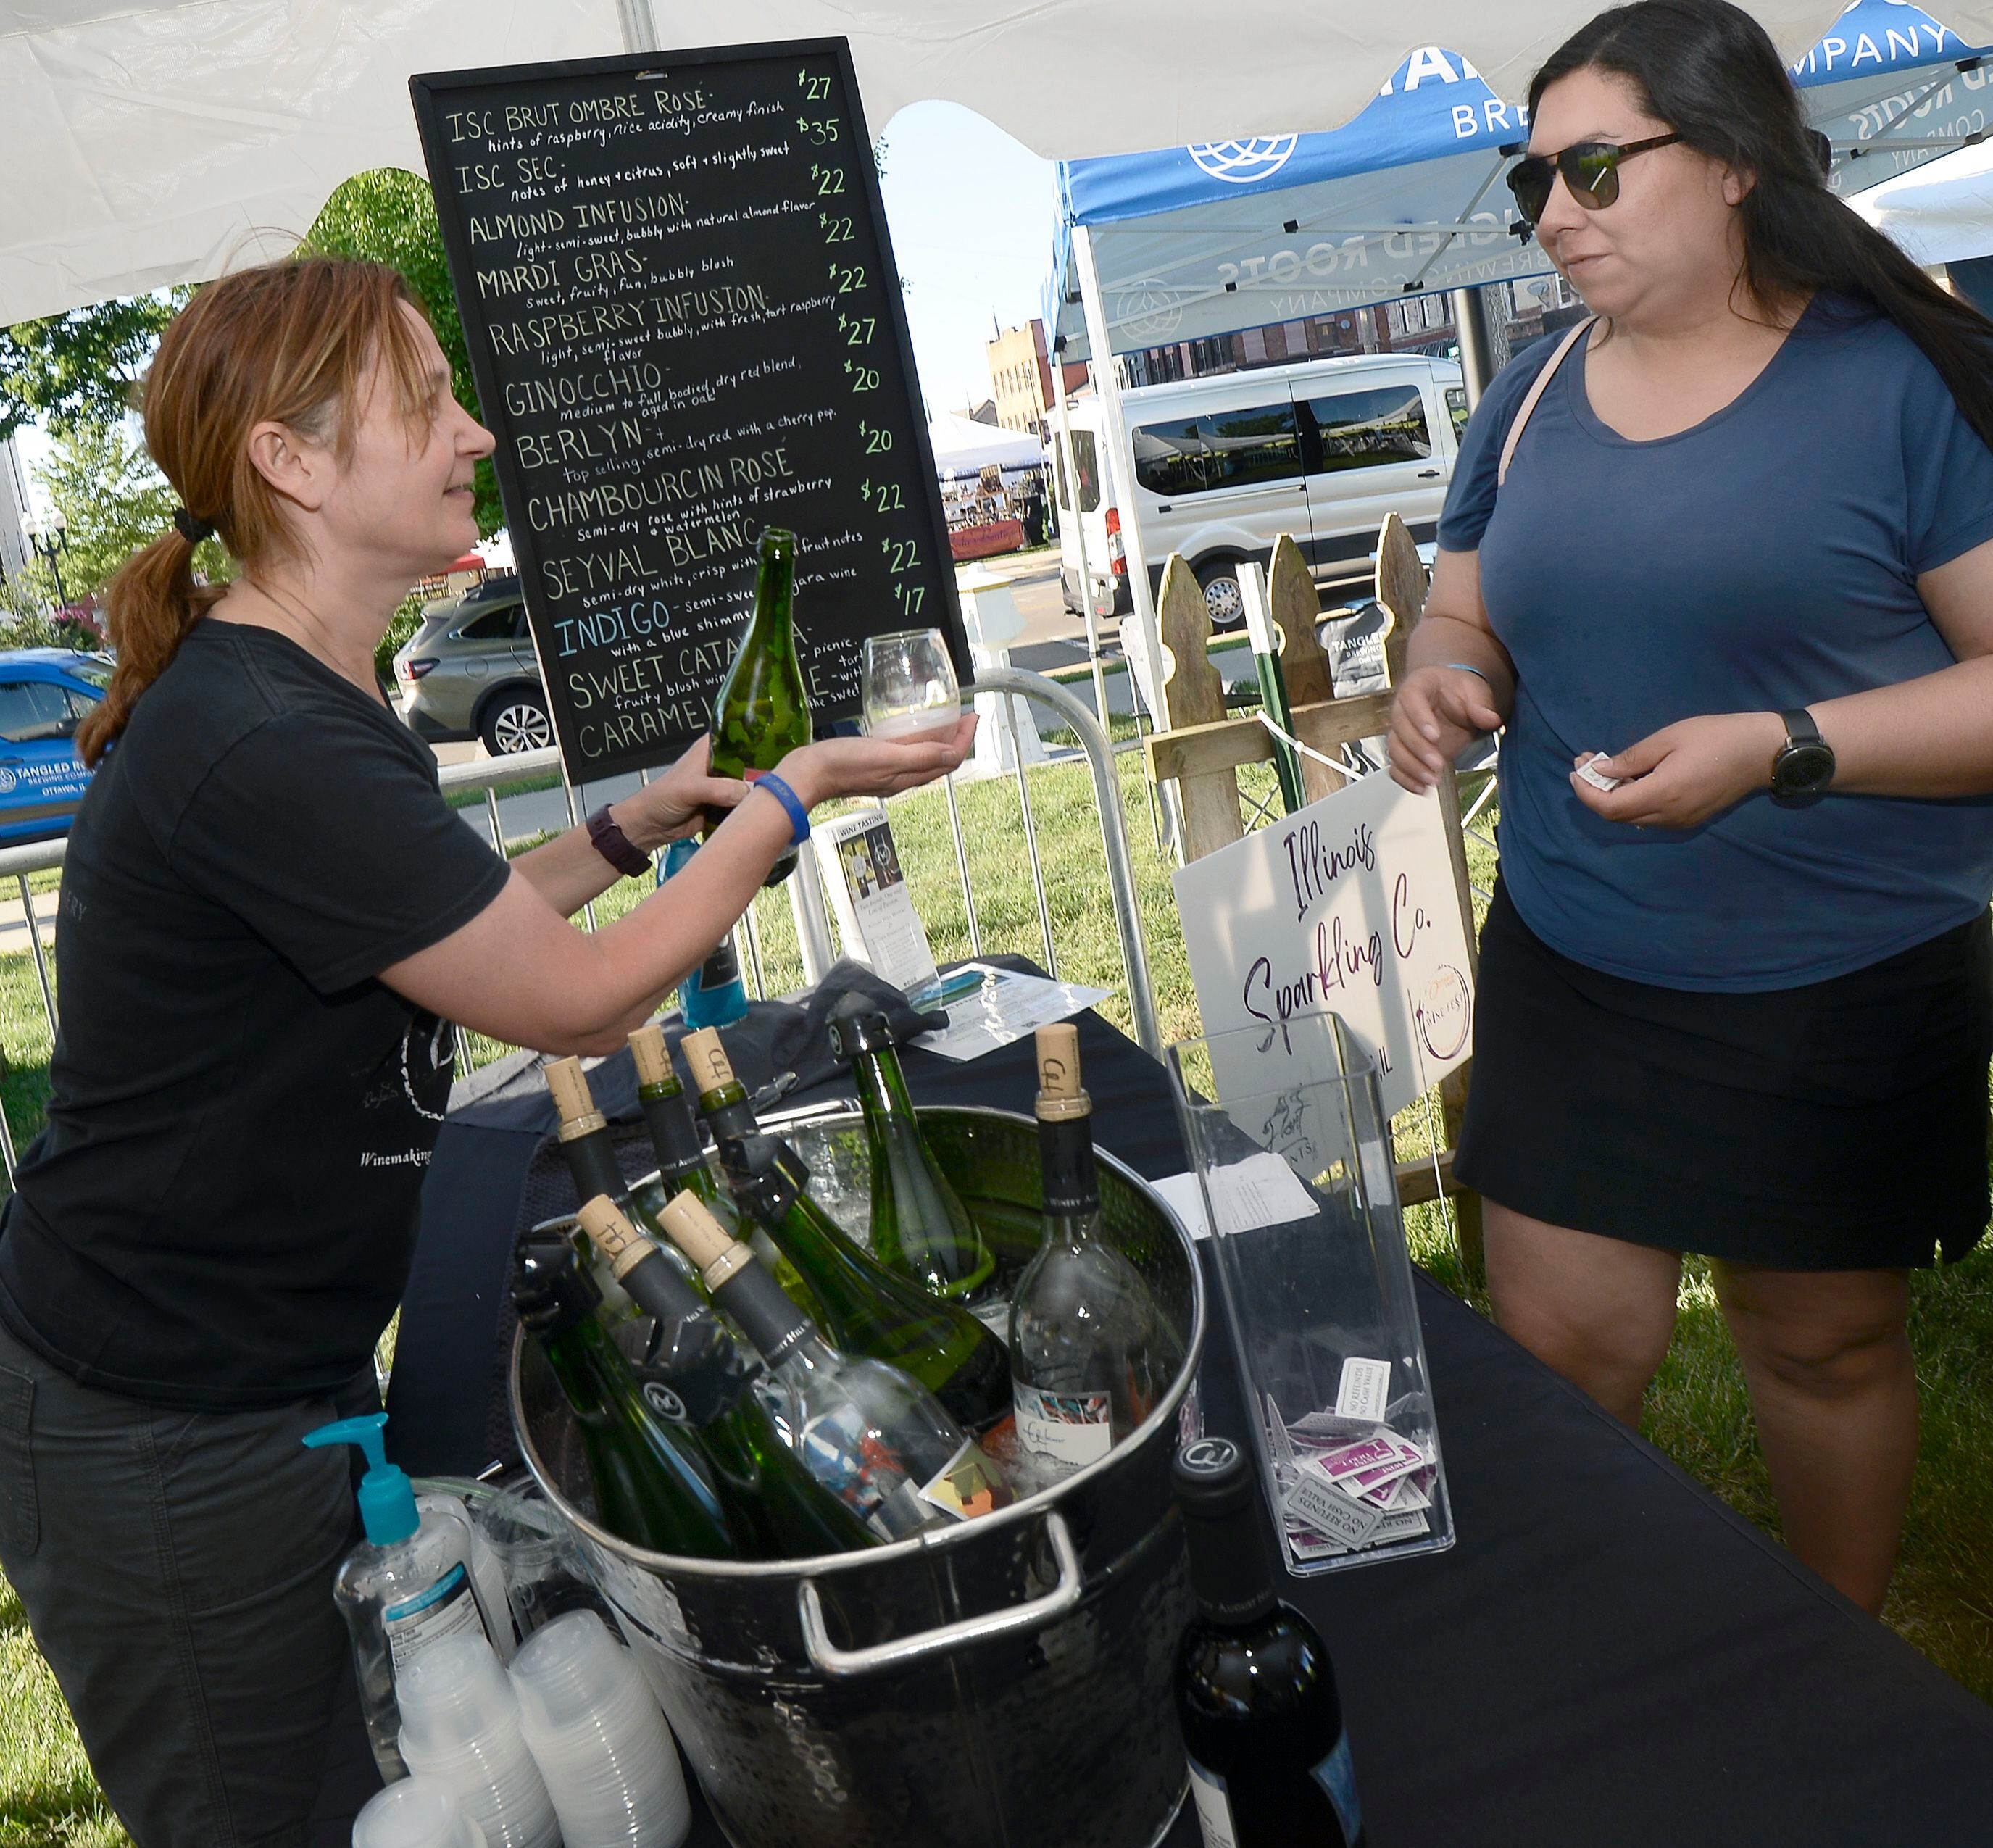 Laurie Smudzinski of August Hill Winery pours a sample of wine for a customer Friday, June 3, 2022, at Wine Fest in Ottawa. The festival runs through Sunday.